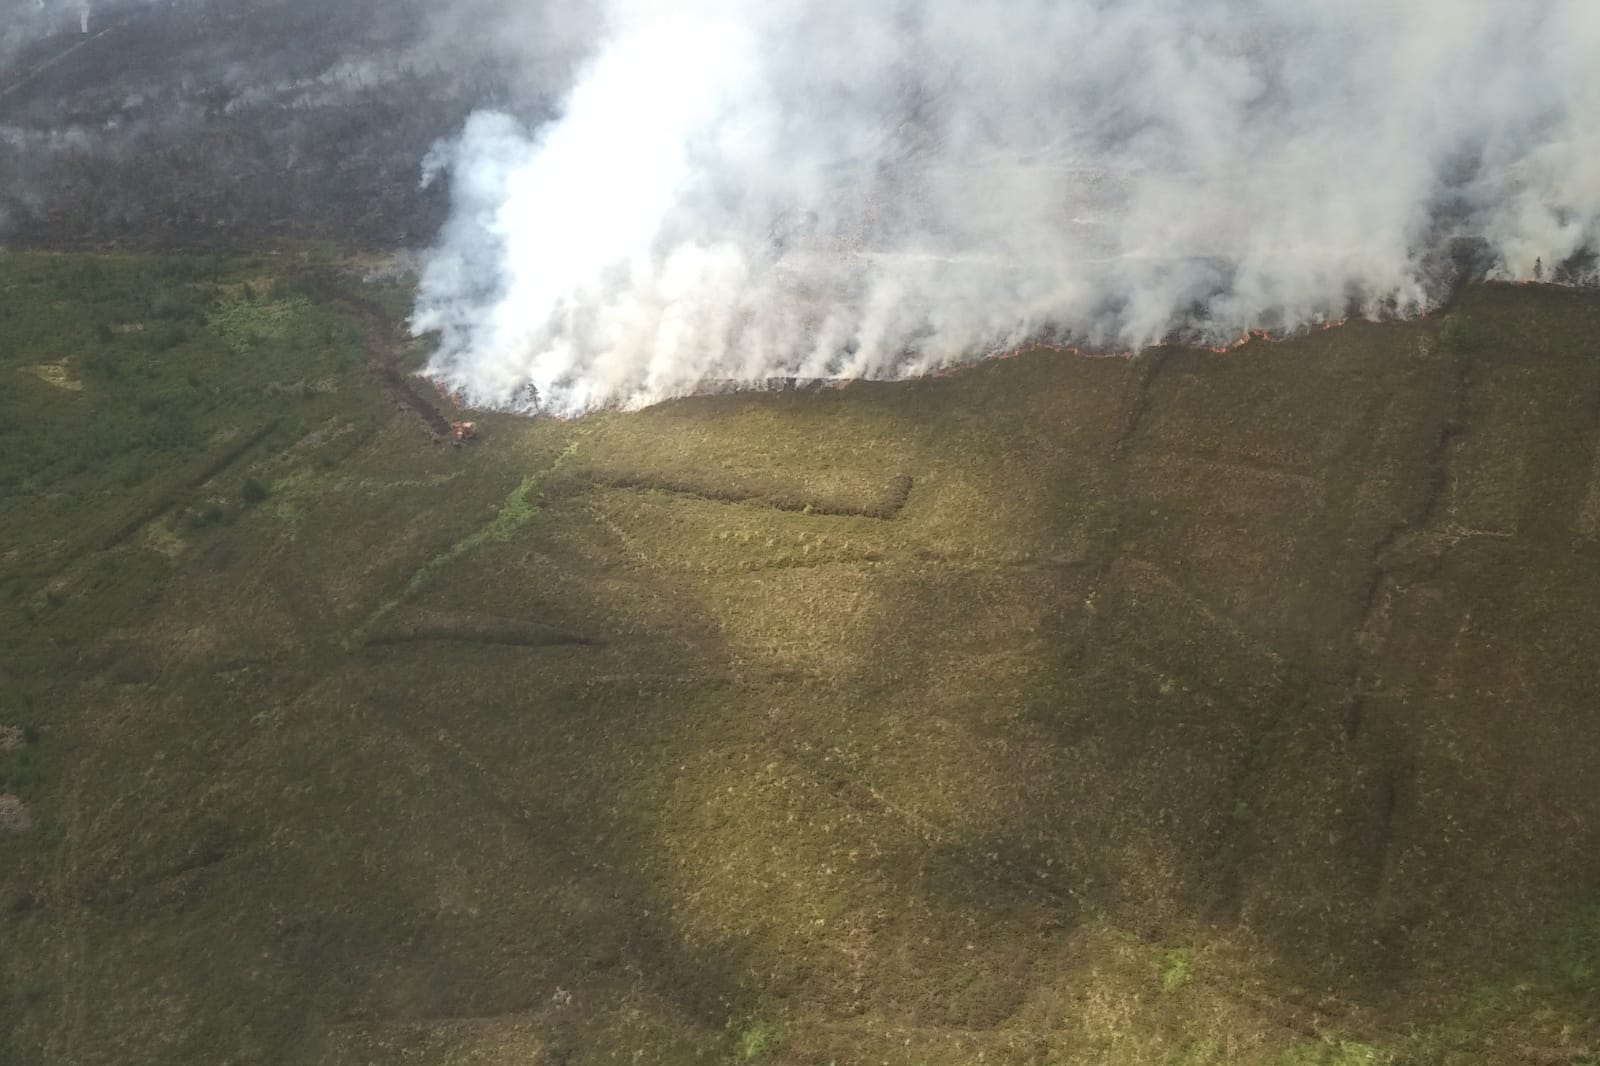 The National Parks and Wildlife Service teams up with Coillte to tackle wildfires using Innovative Drone Technology